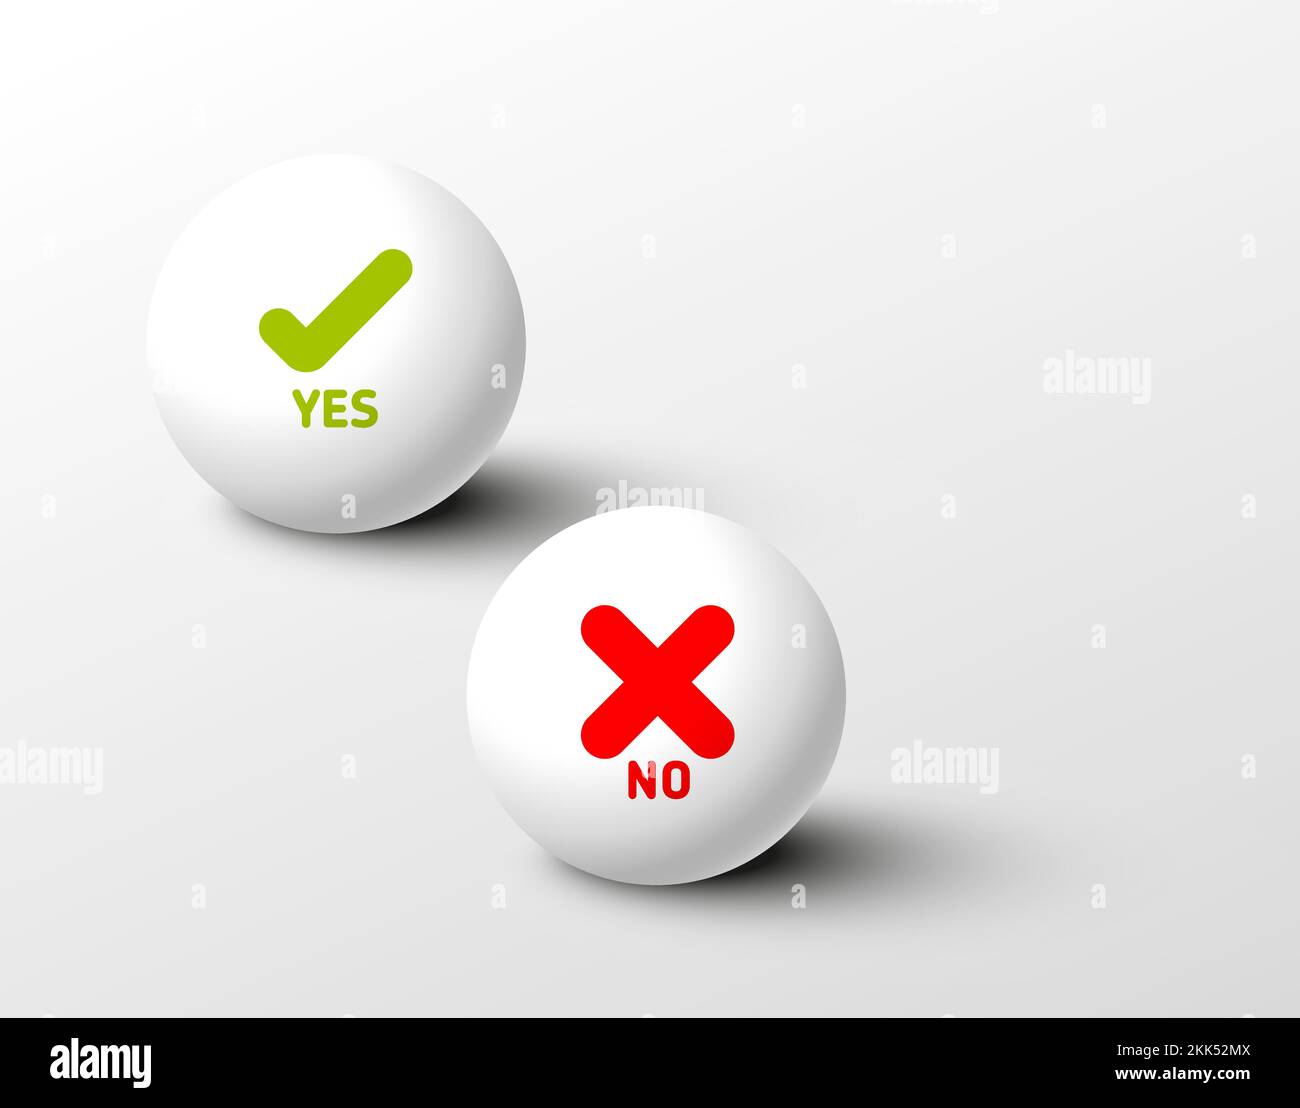 Set of fresh minimalist icons for various status - yes, no, accept, cancel in light ball spheres on light gray gradient background - green and red col Stock Vector